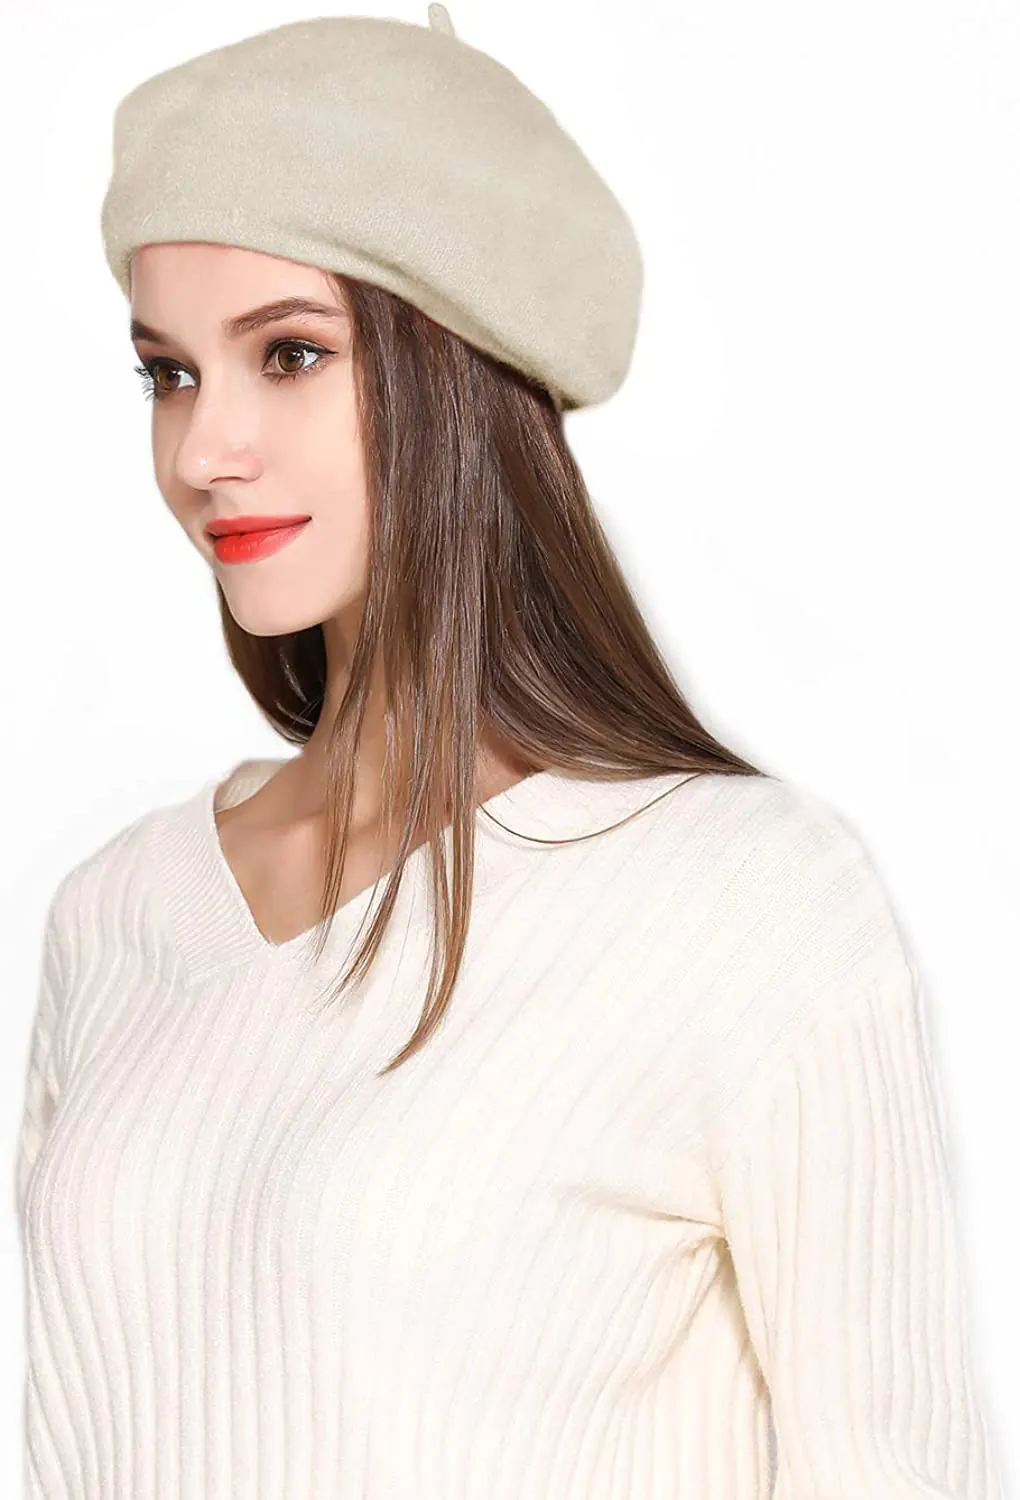 Jeicy Wool French Beret Hat with Skily Scarf and Brooch